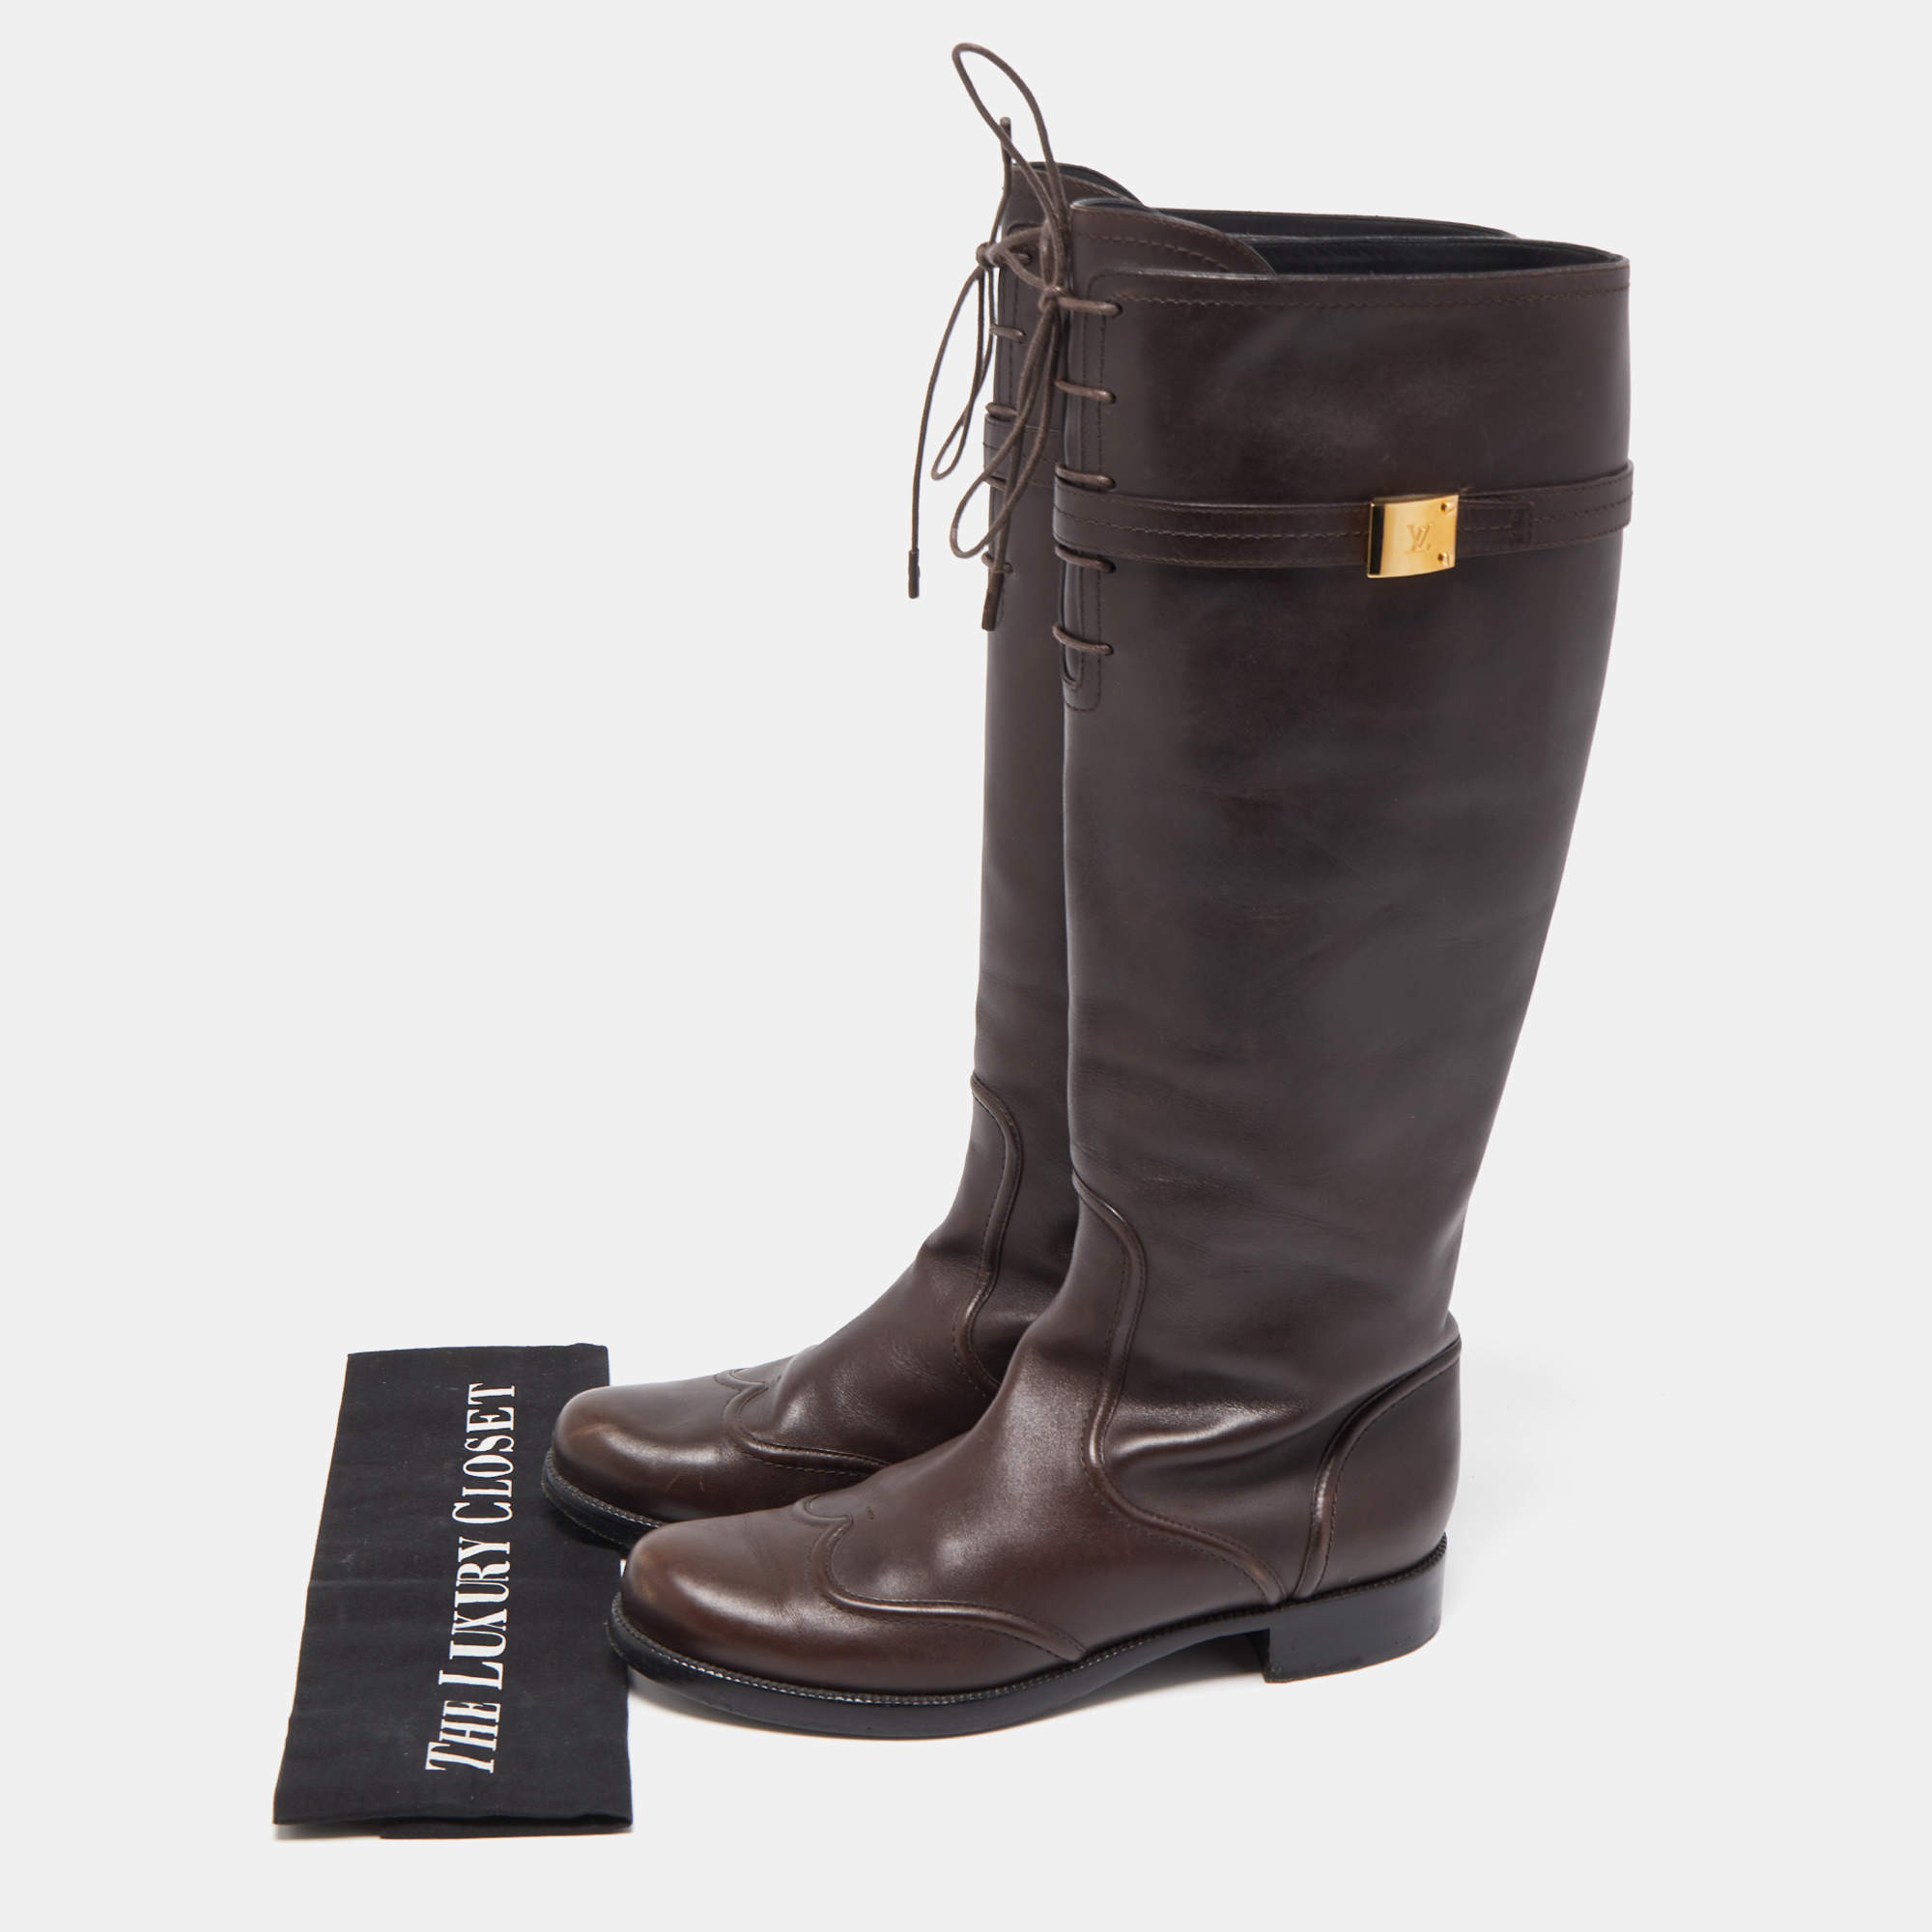 Louis Vuitton Knee High Brown Leather Flat Boots - Size 39 